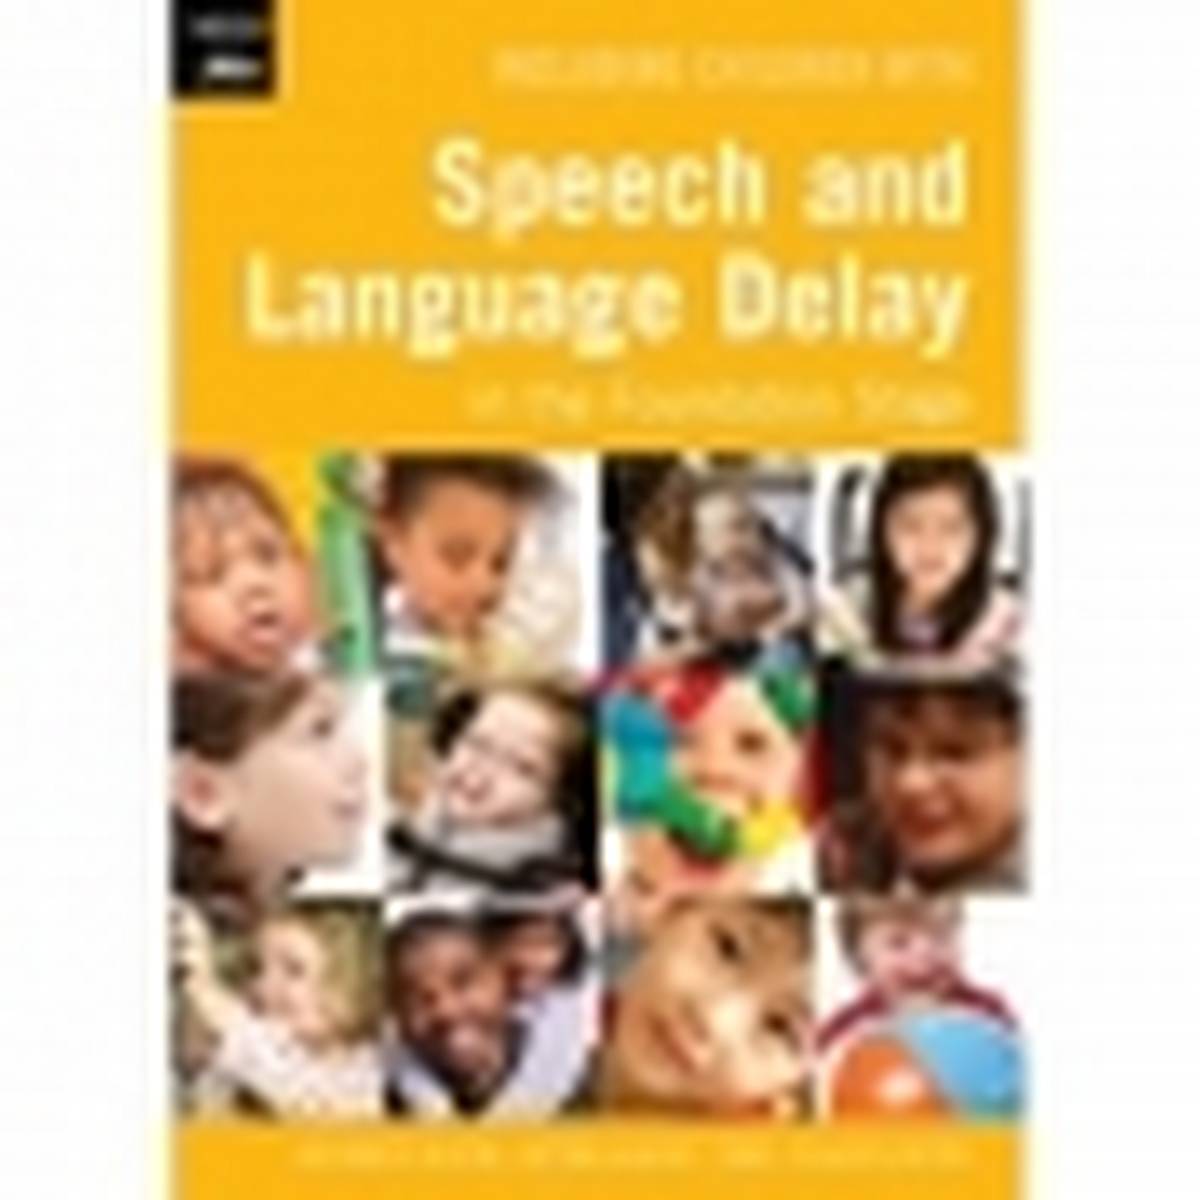 Including Children with Speech and Language Delay